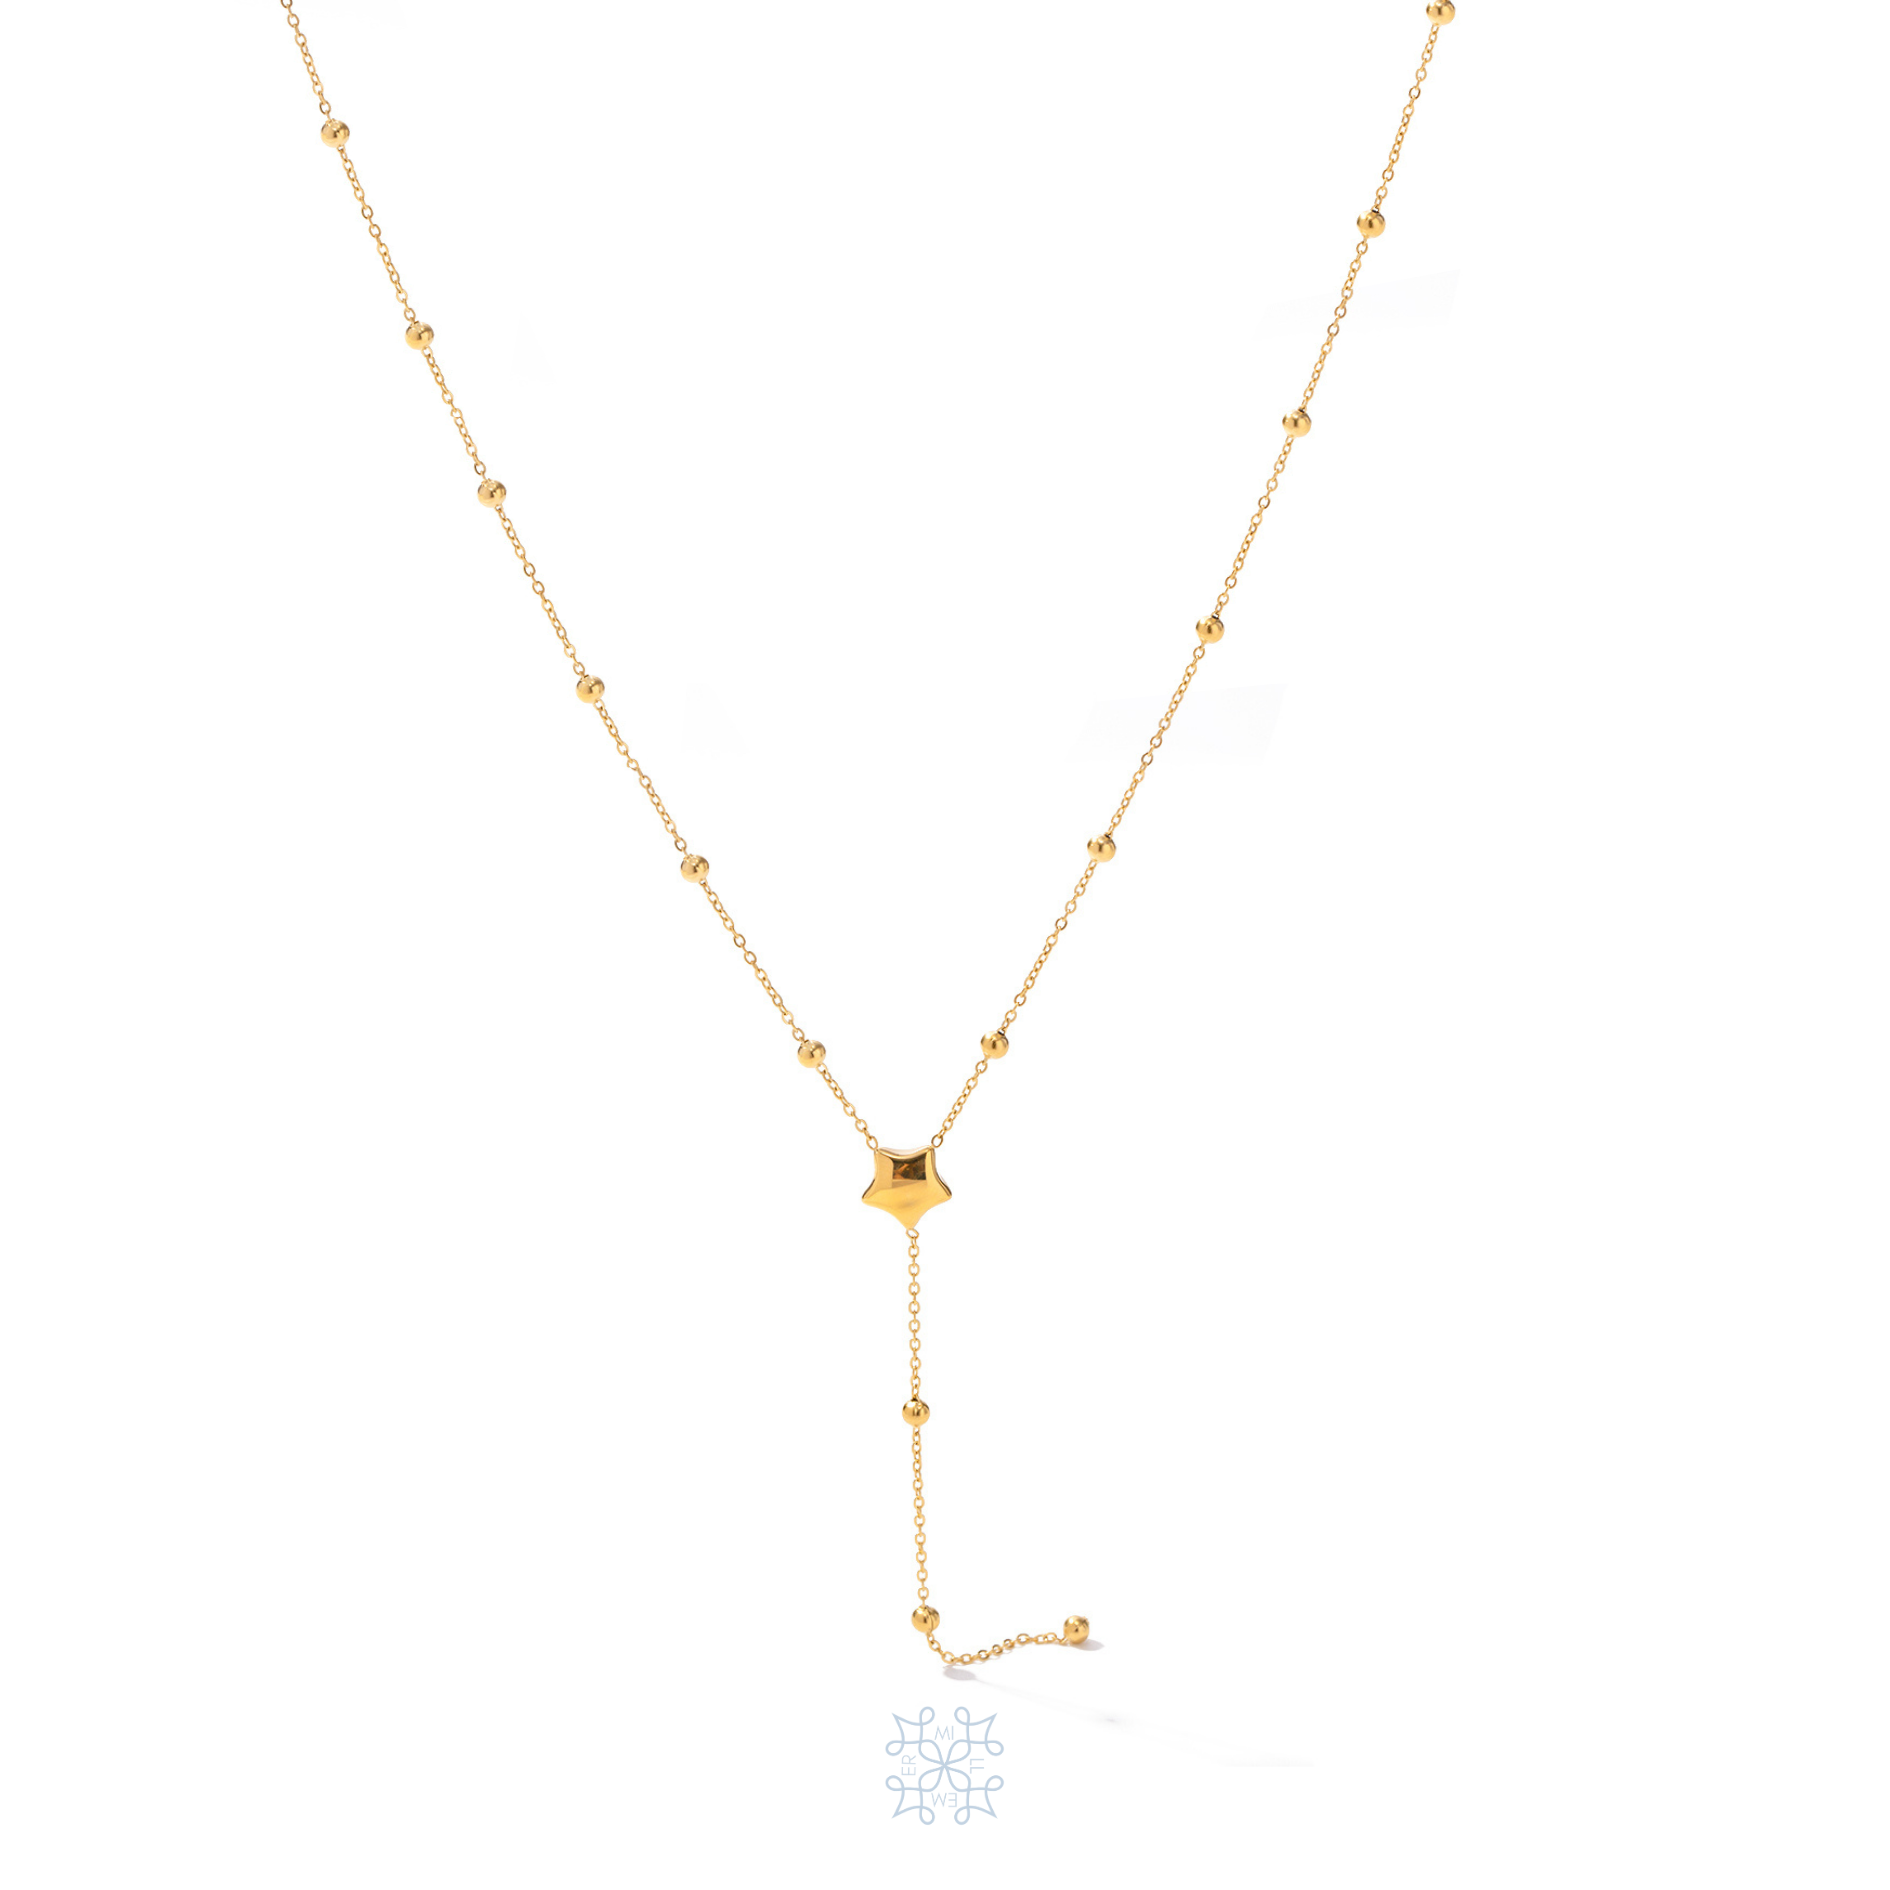 ETOILE Dainty Chain Necklace. Gold dainty chain. Starg gold pendnat in the middle of the chain. A gold beaded chain extension drop from the star pendnat. 